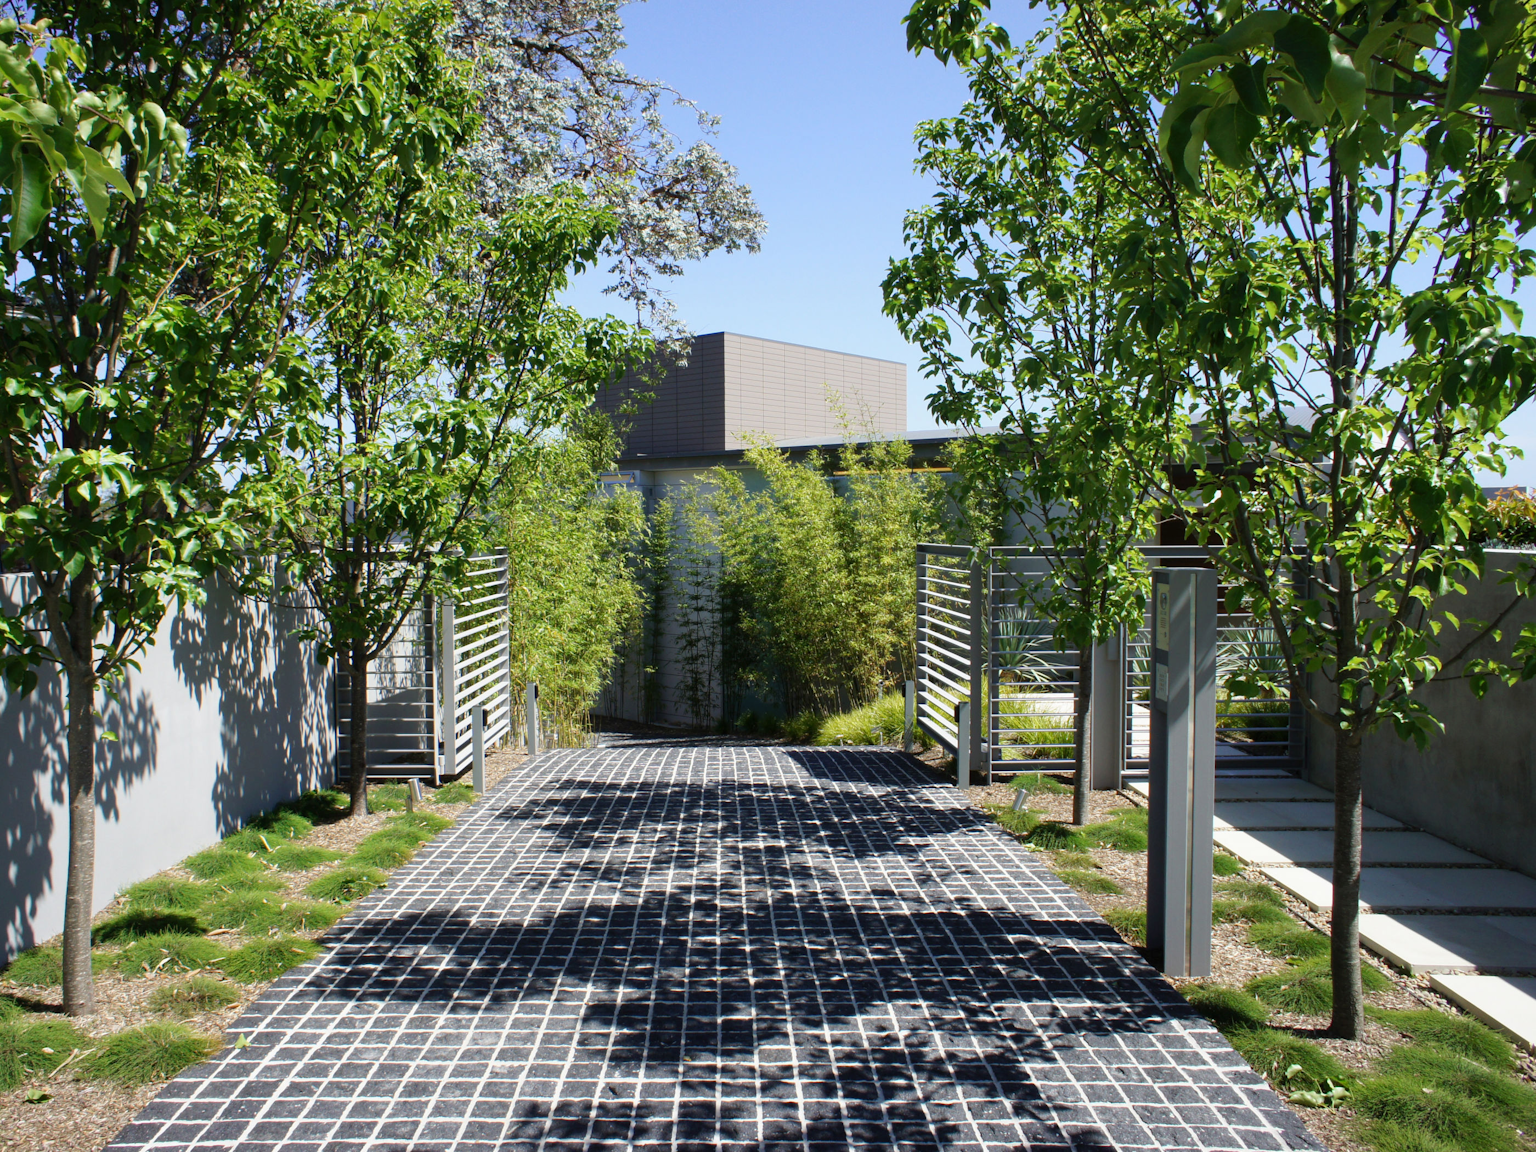 Driveway in split face Raven granite cobbles with pathway in Cashmere concrete pavers